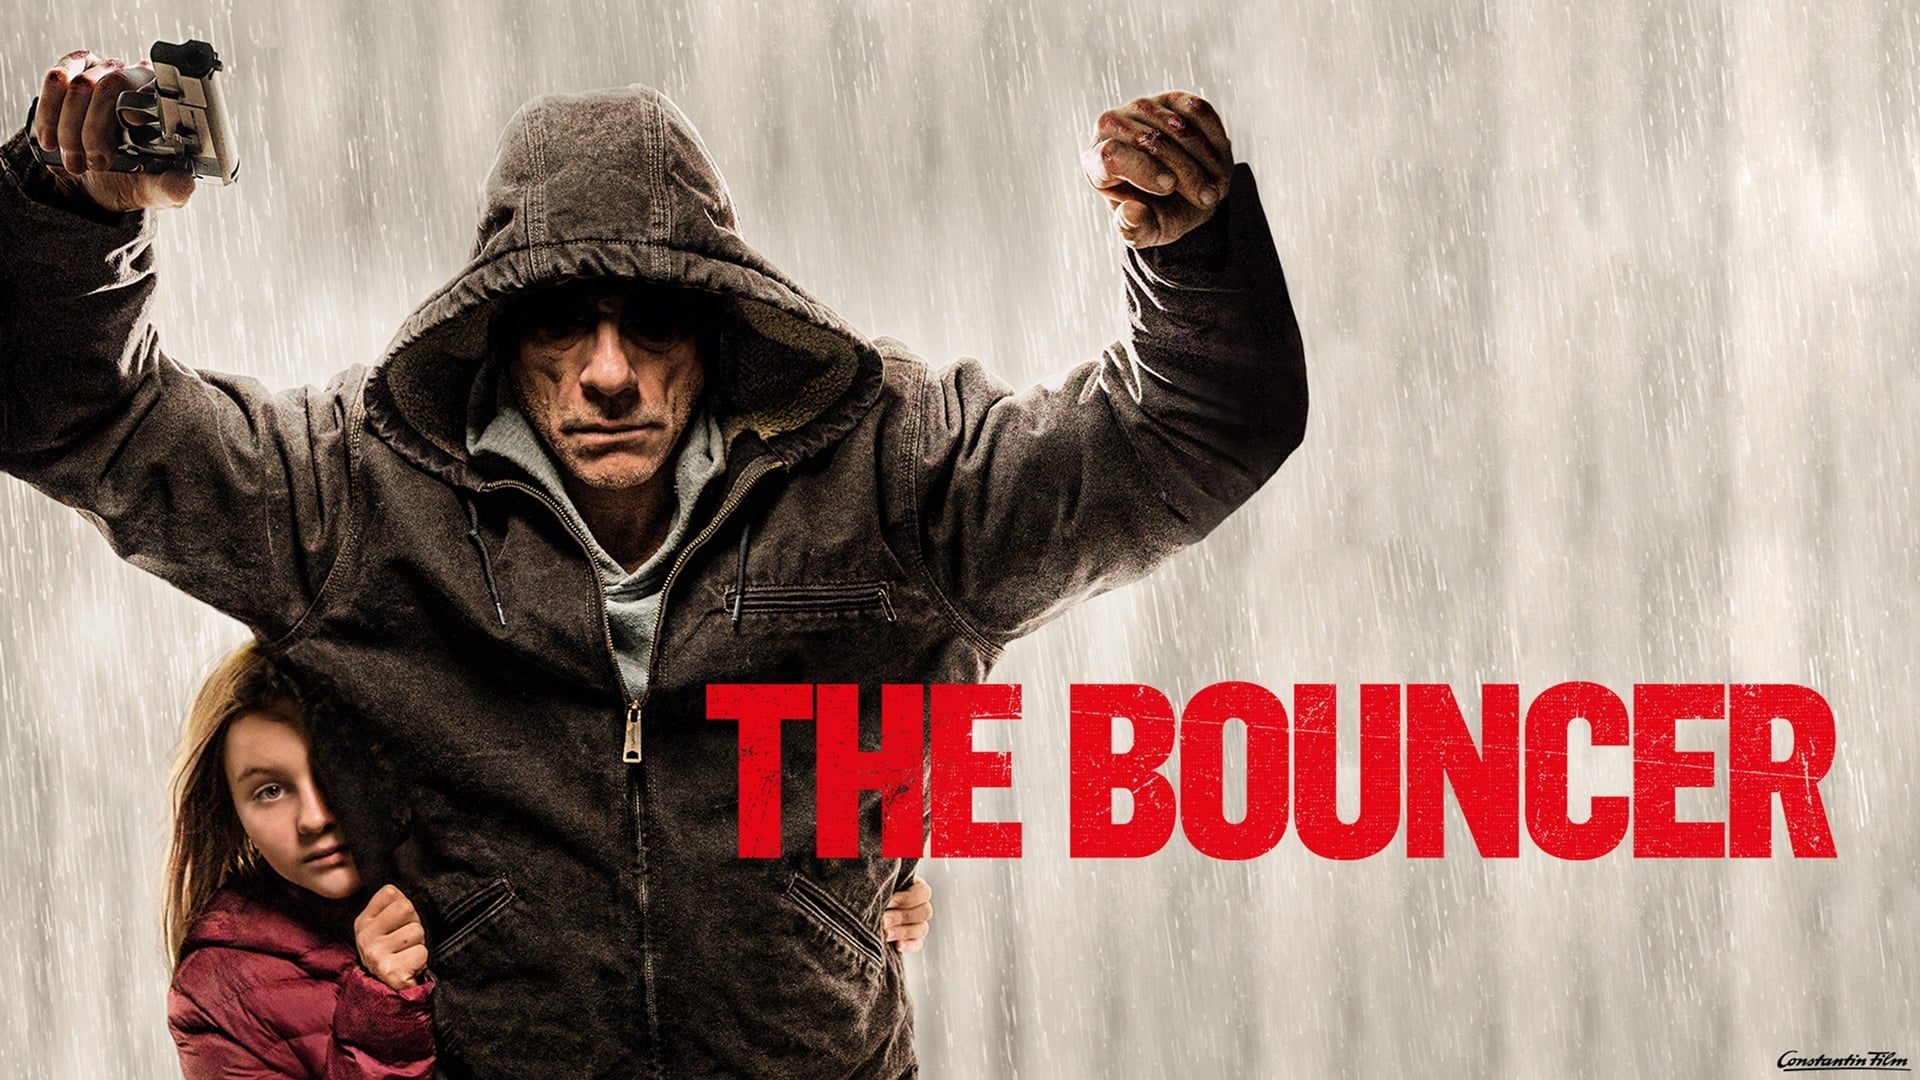 Watch The Bouncer (2018) Full Movie Online Free | Movie & TV Online HD Quality1920 x 1080